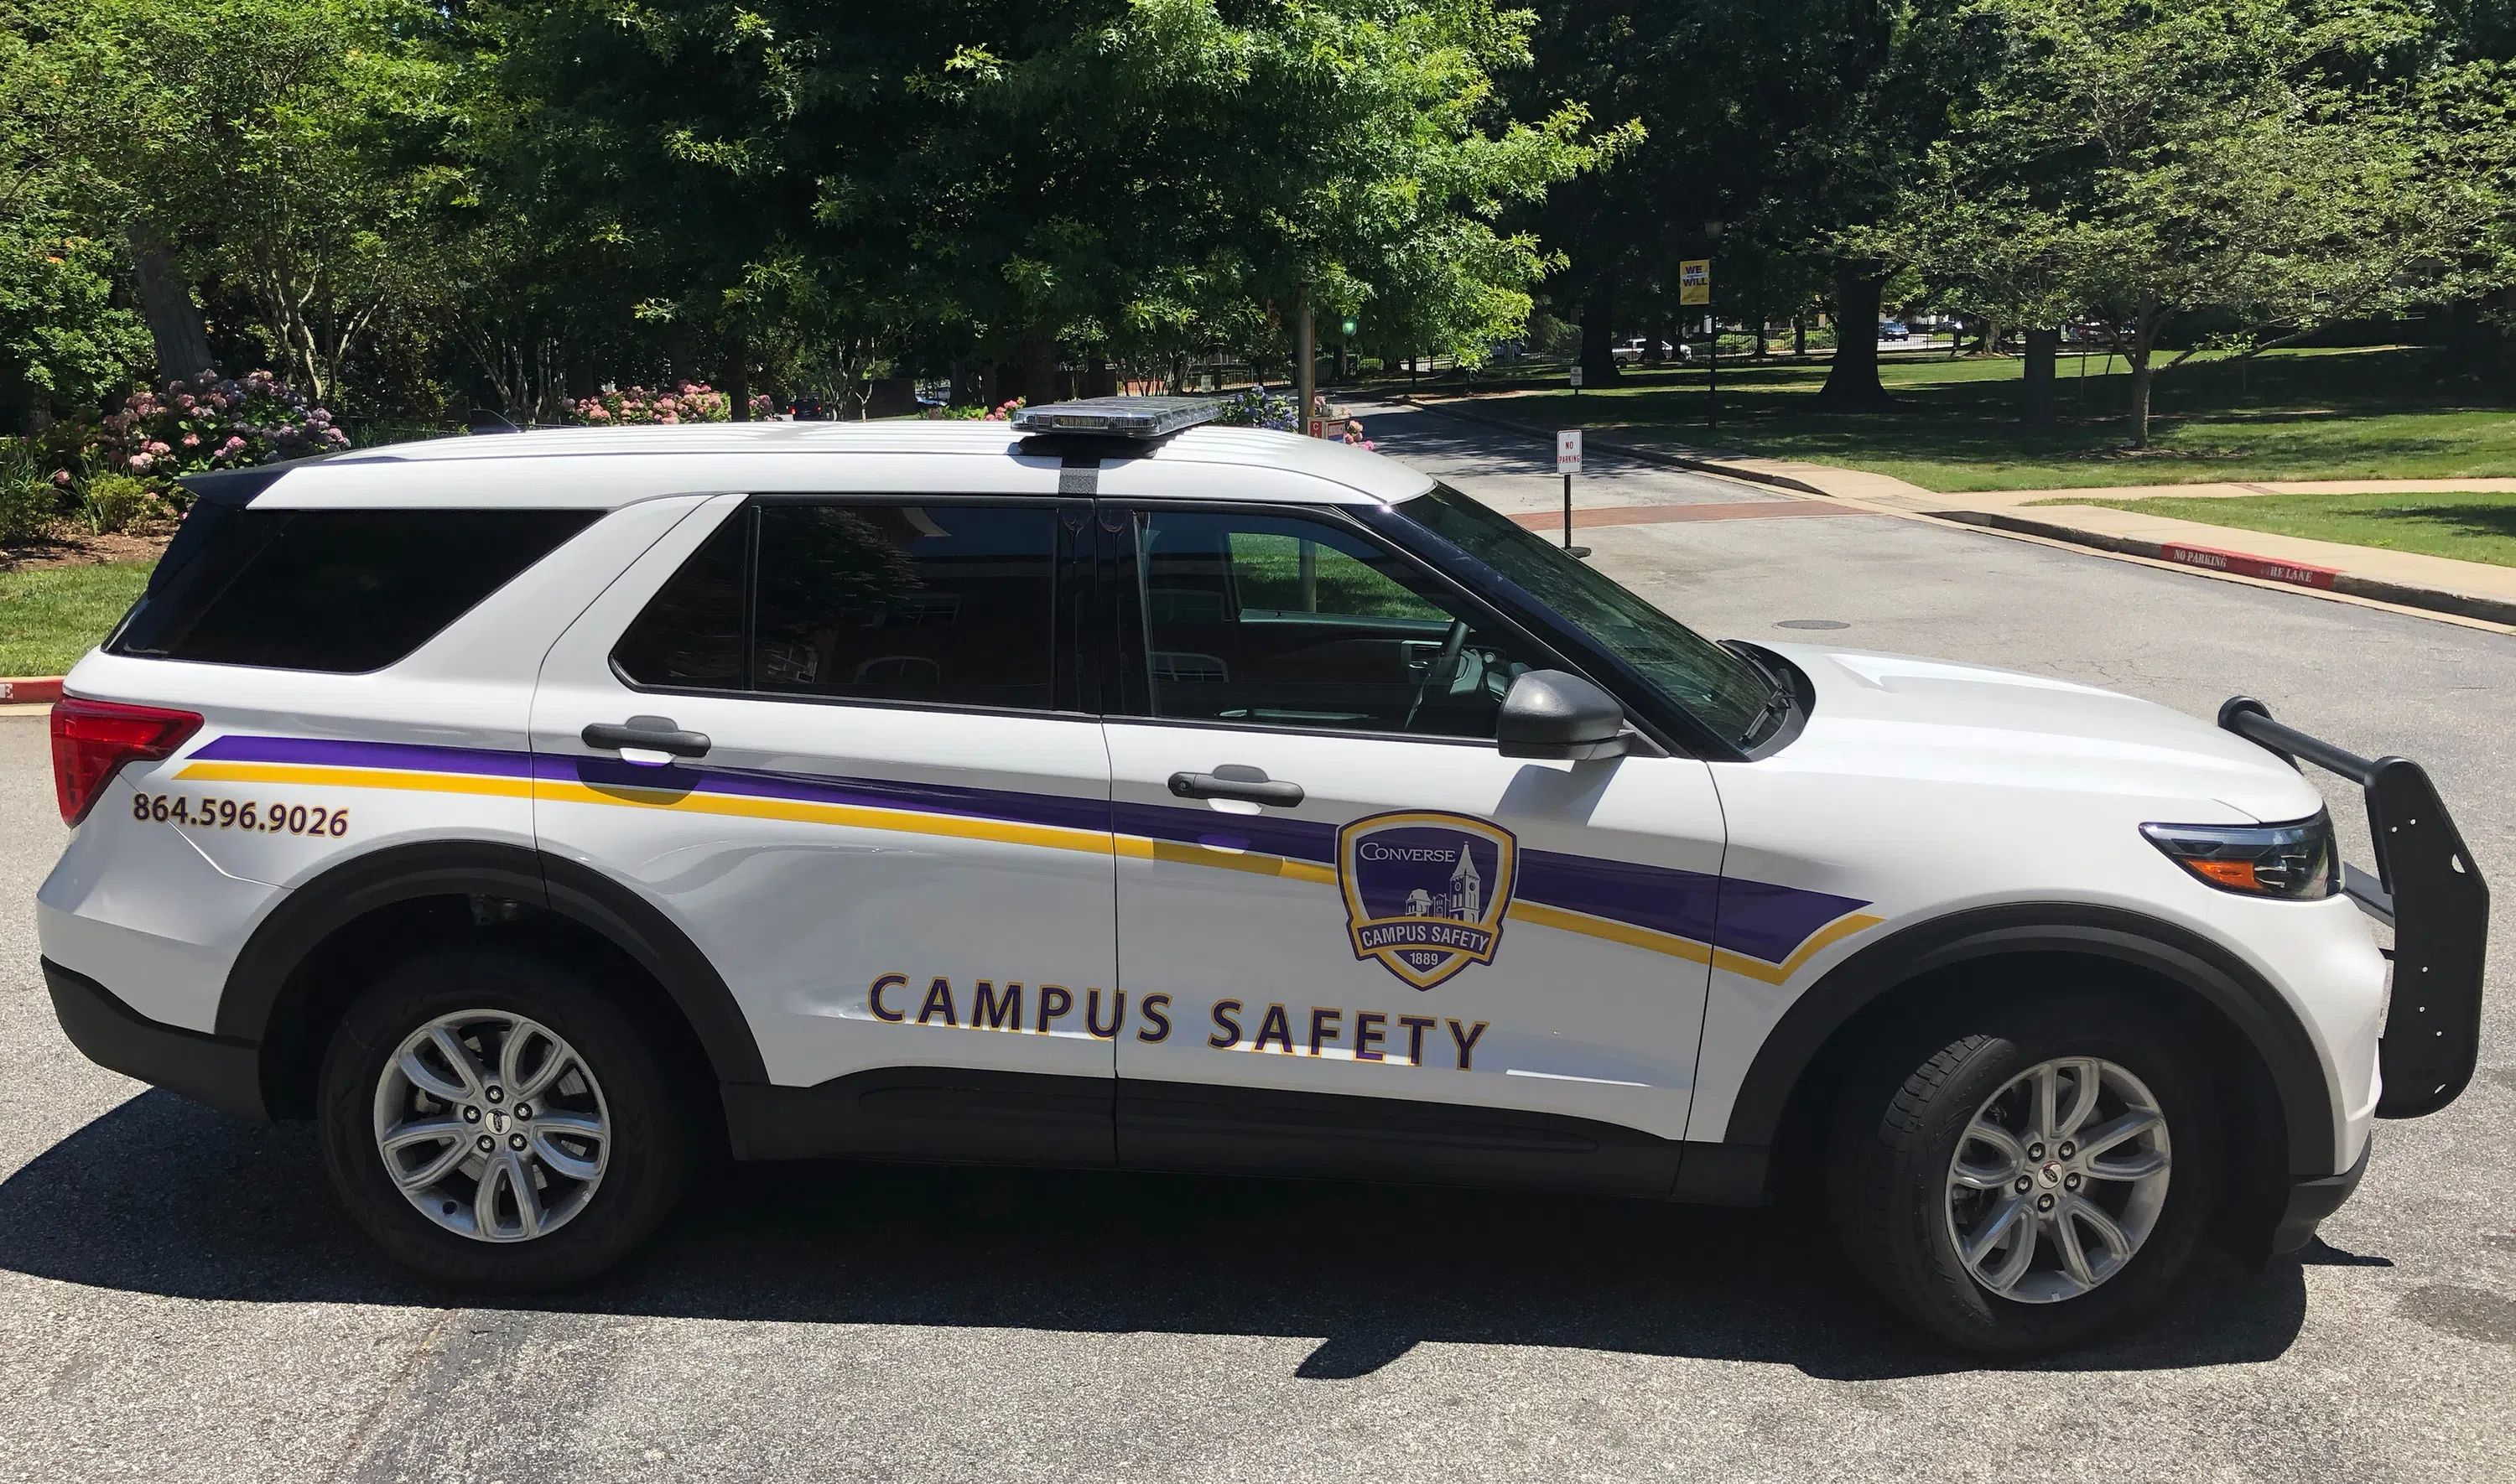 White sport utility vehicle features light bar on top and yellow and purple stripes on the side. Words on the side say "CAMPUS SAFETY" along with the phone number 864.596.9026.